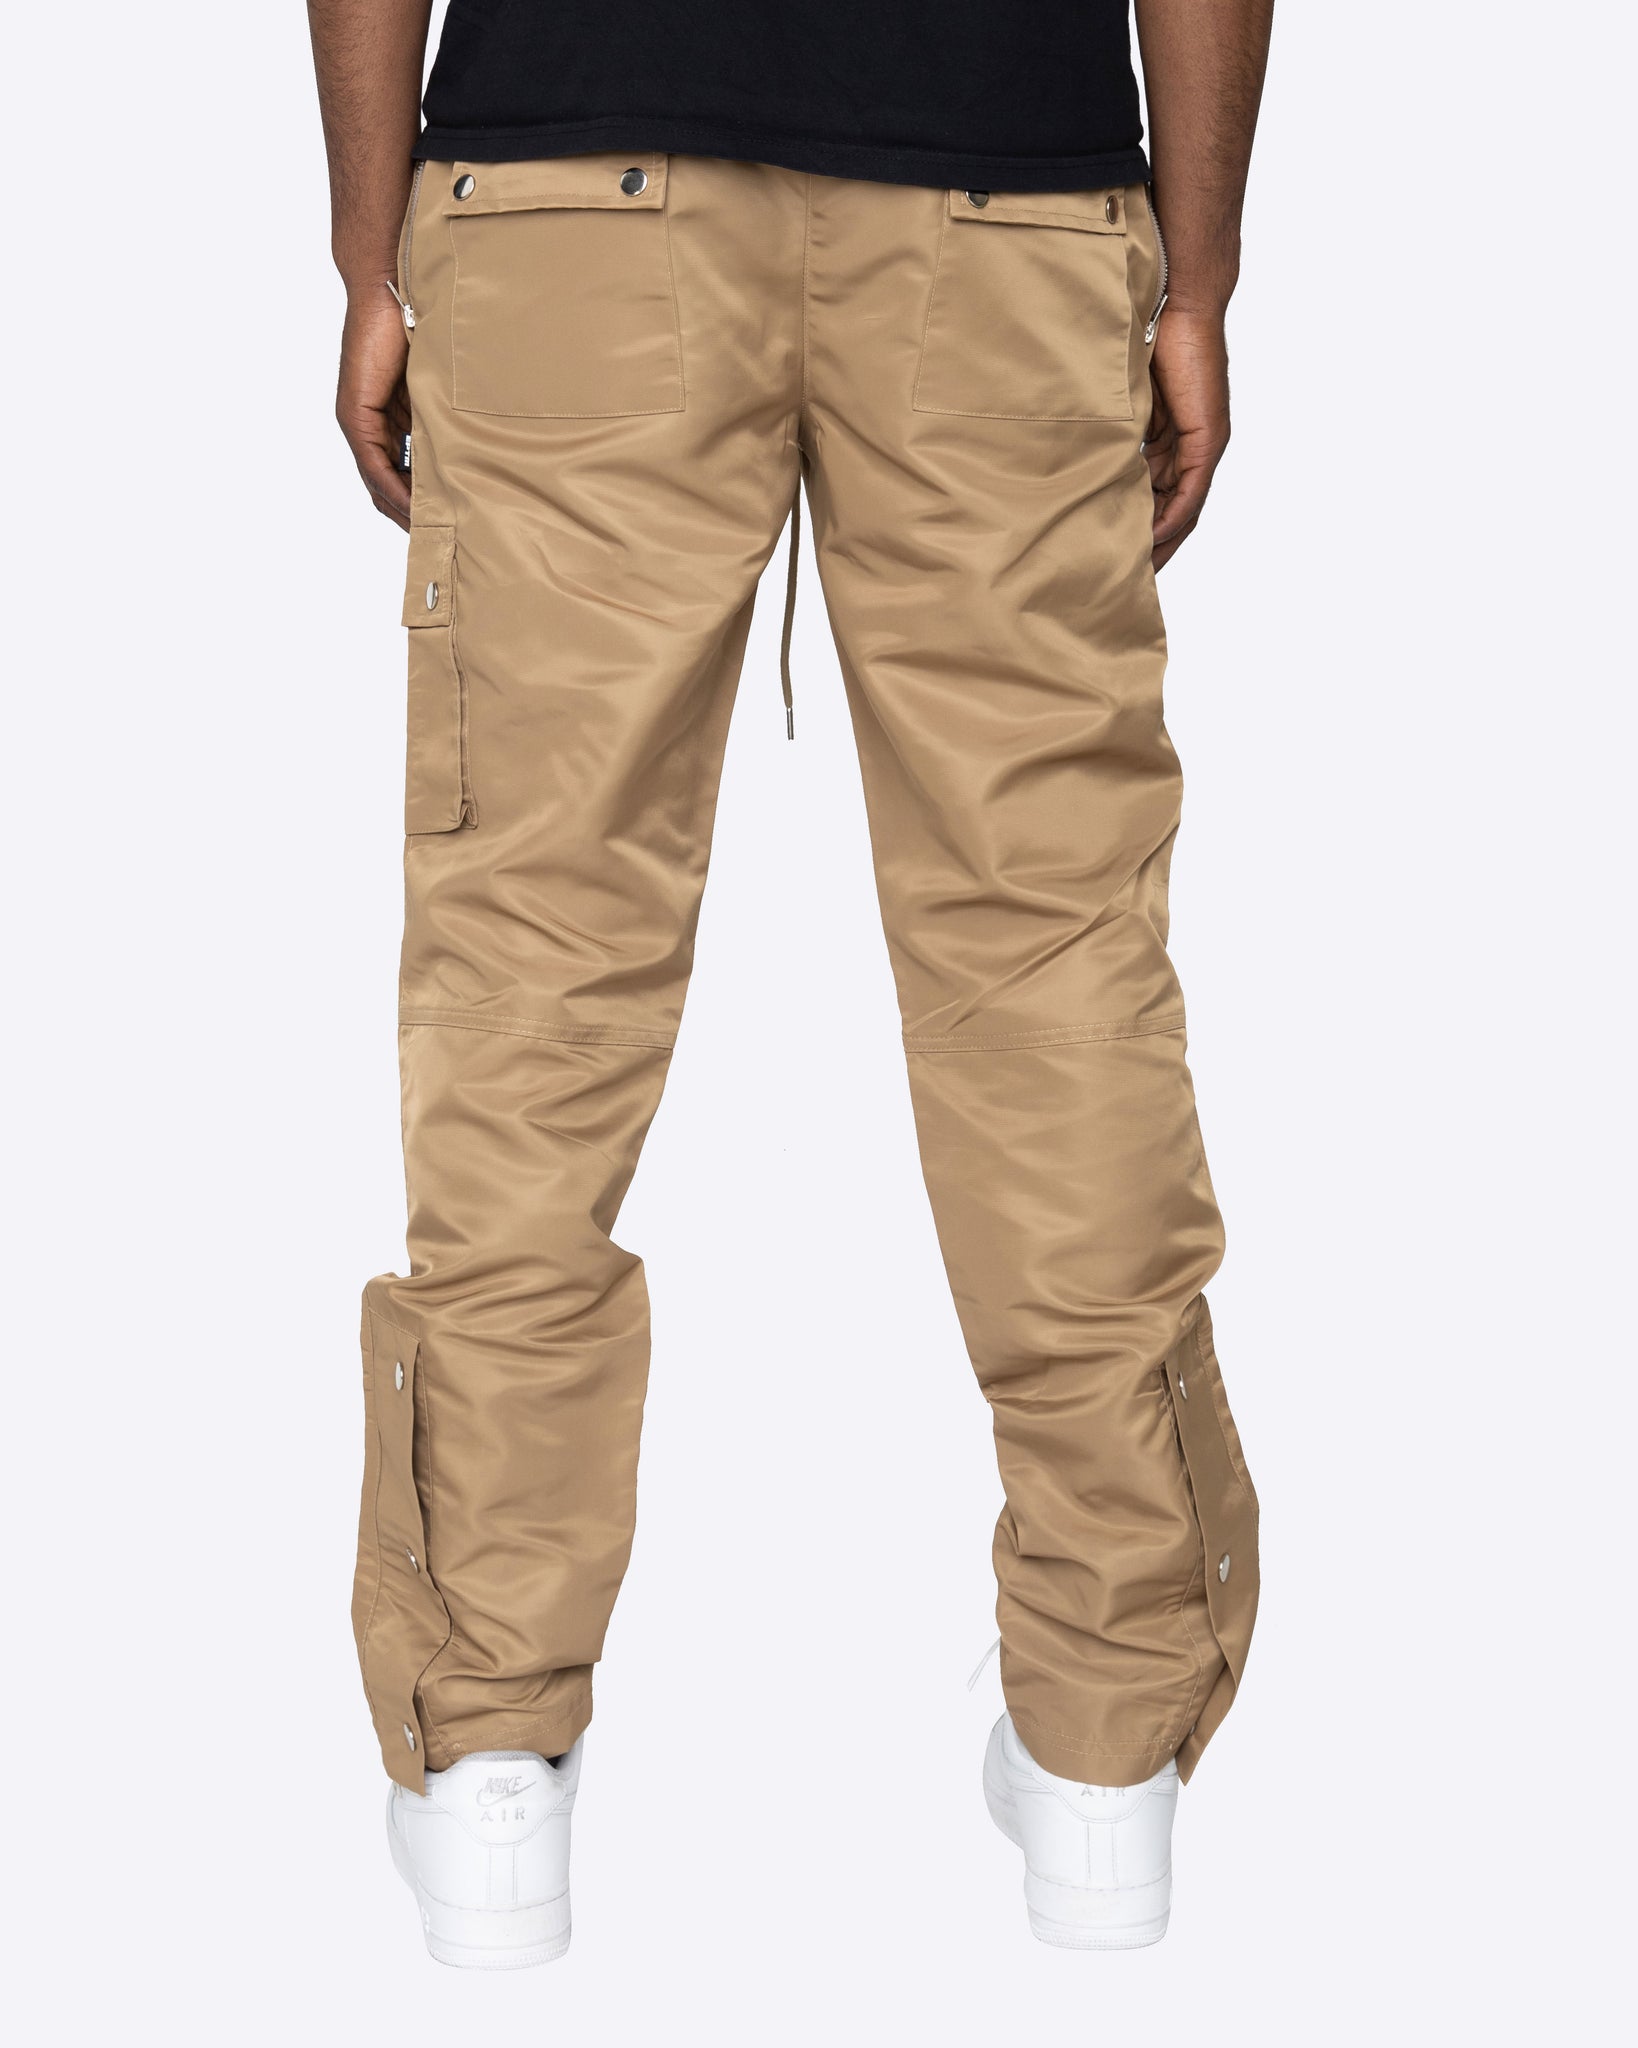 EPTM ROVER UTILITY PANTS- COFFEE